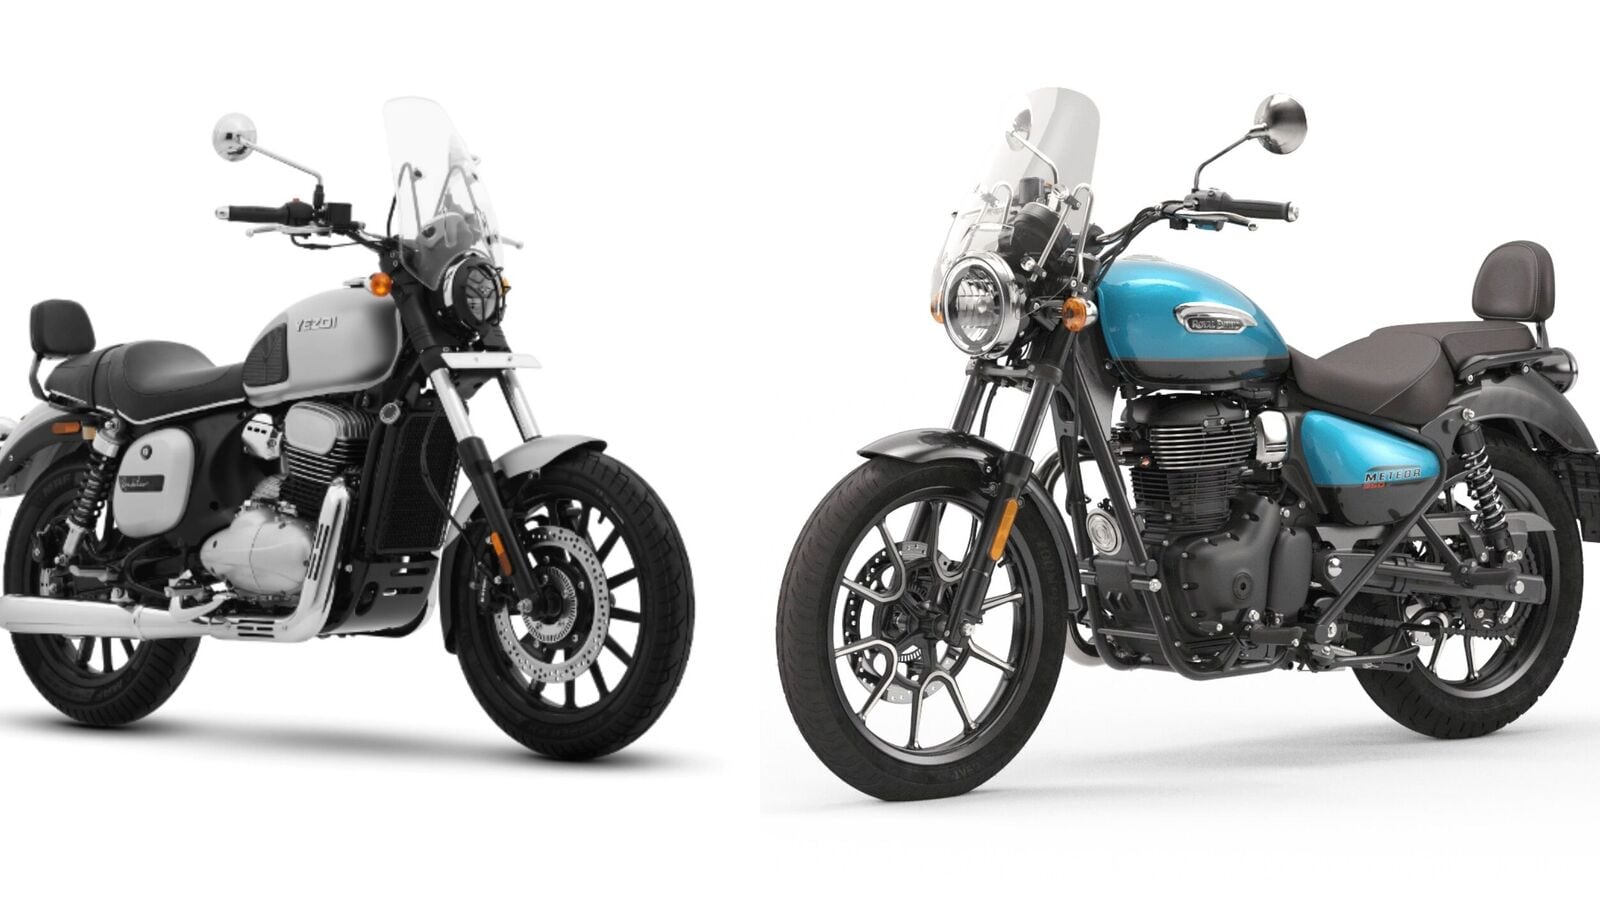 Royal Enfield Meteor 350 vs Yezdi Roadster: Price, specs and hardware compared